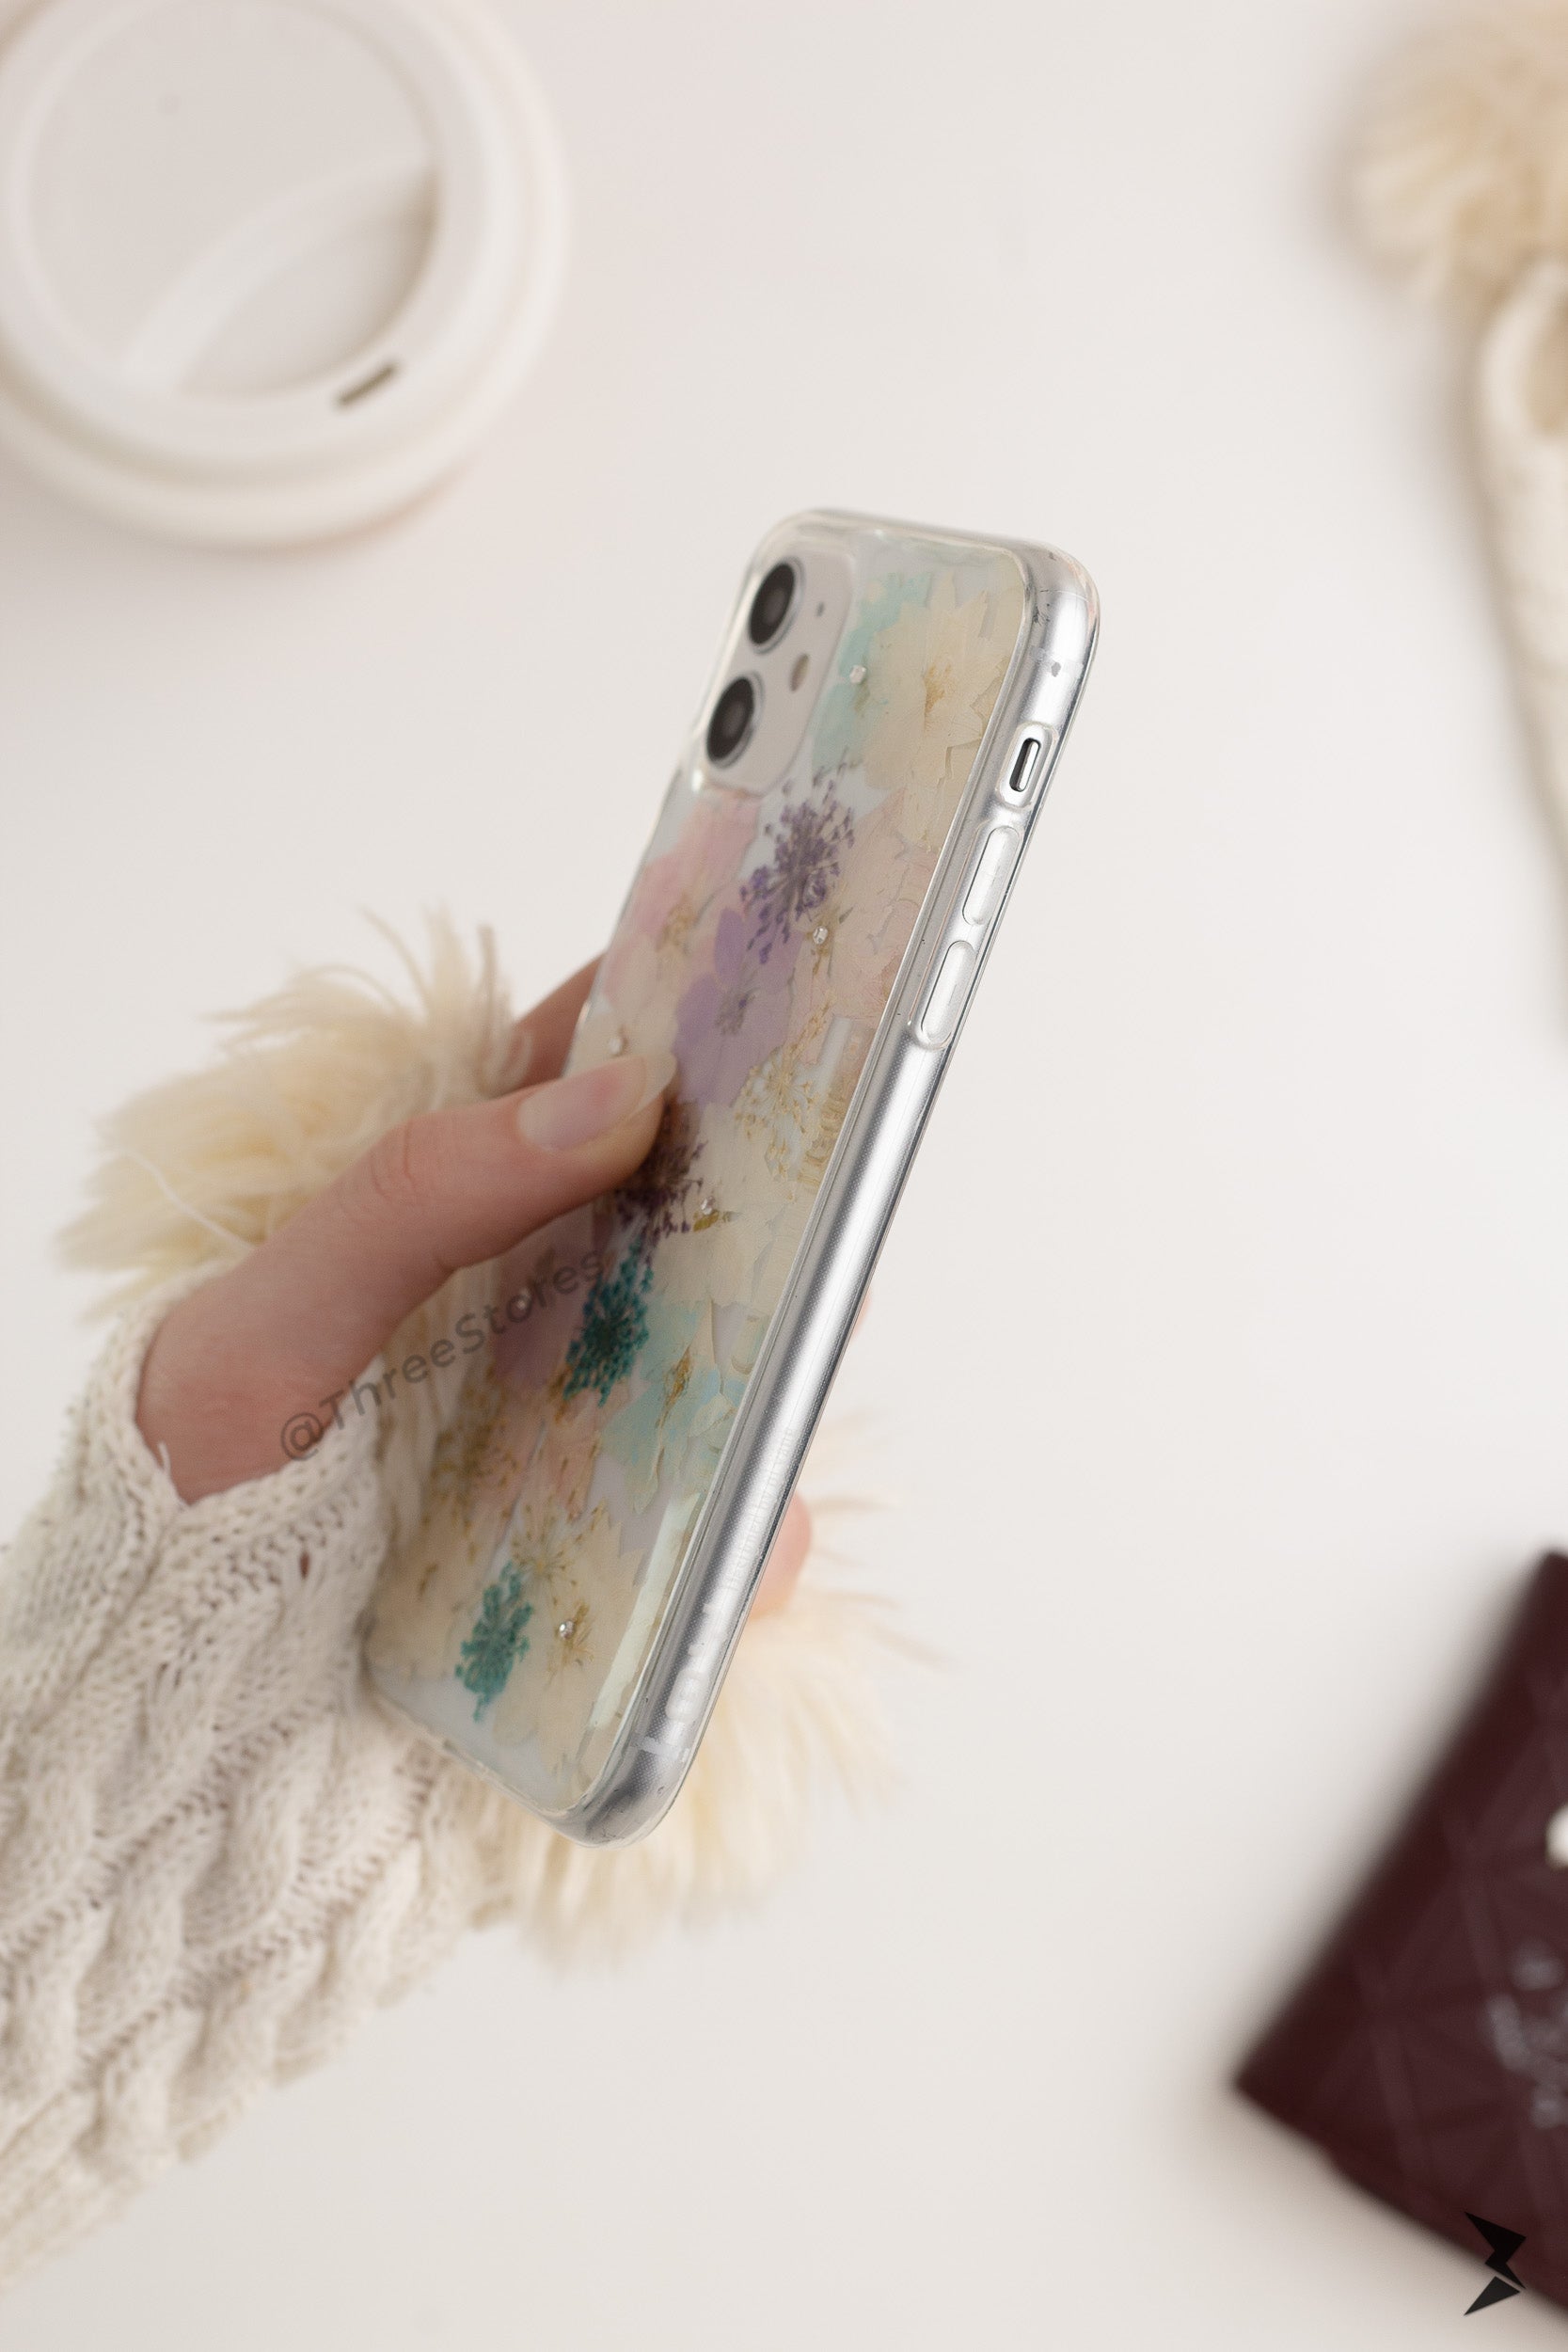 Qy Yang Flower Case iPhone 12 Pro Max